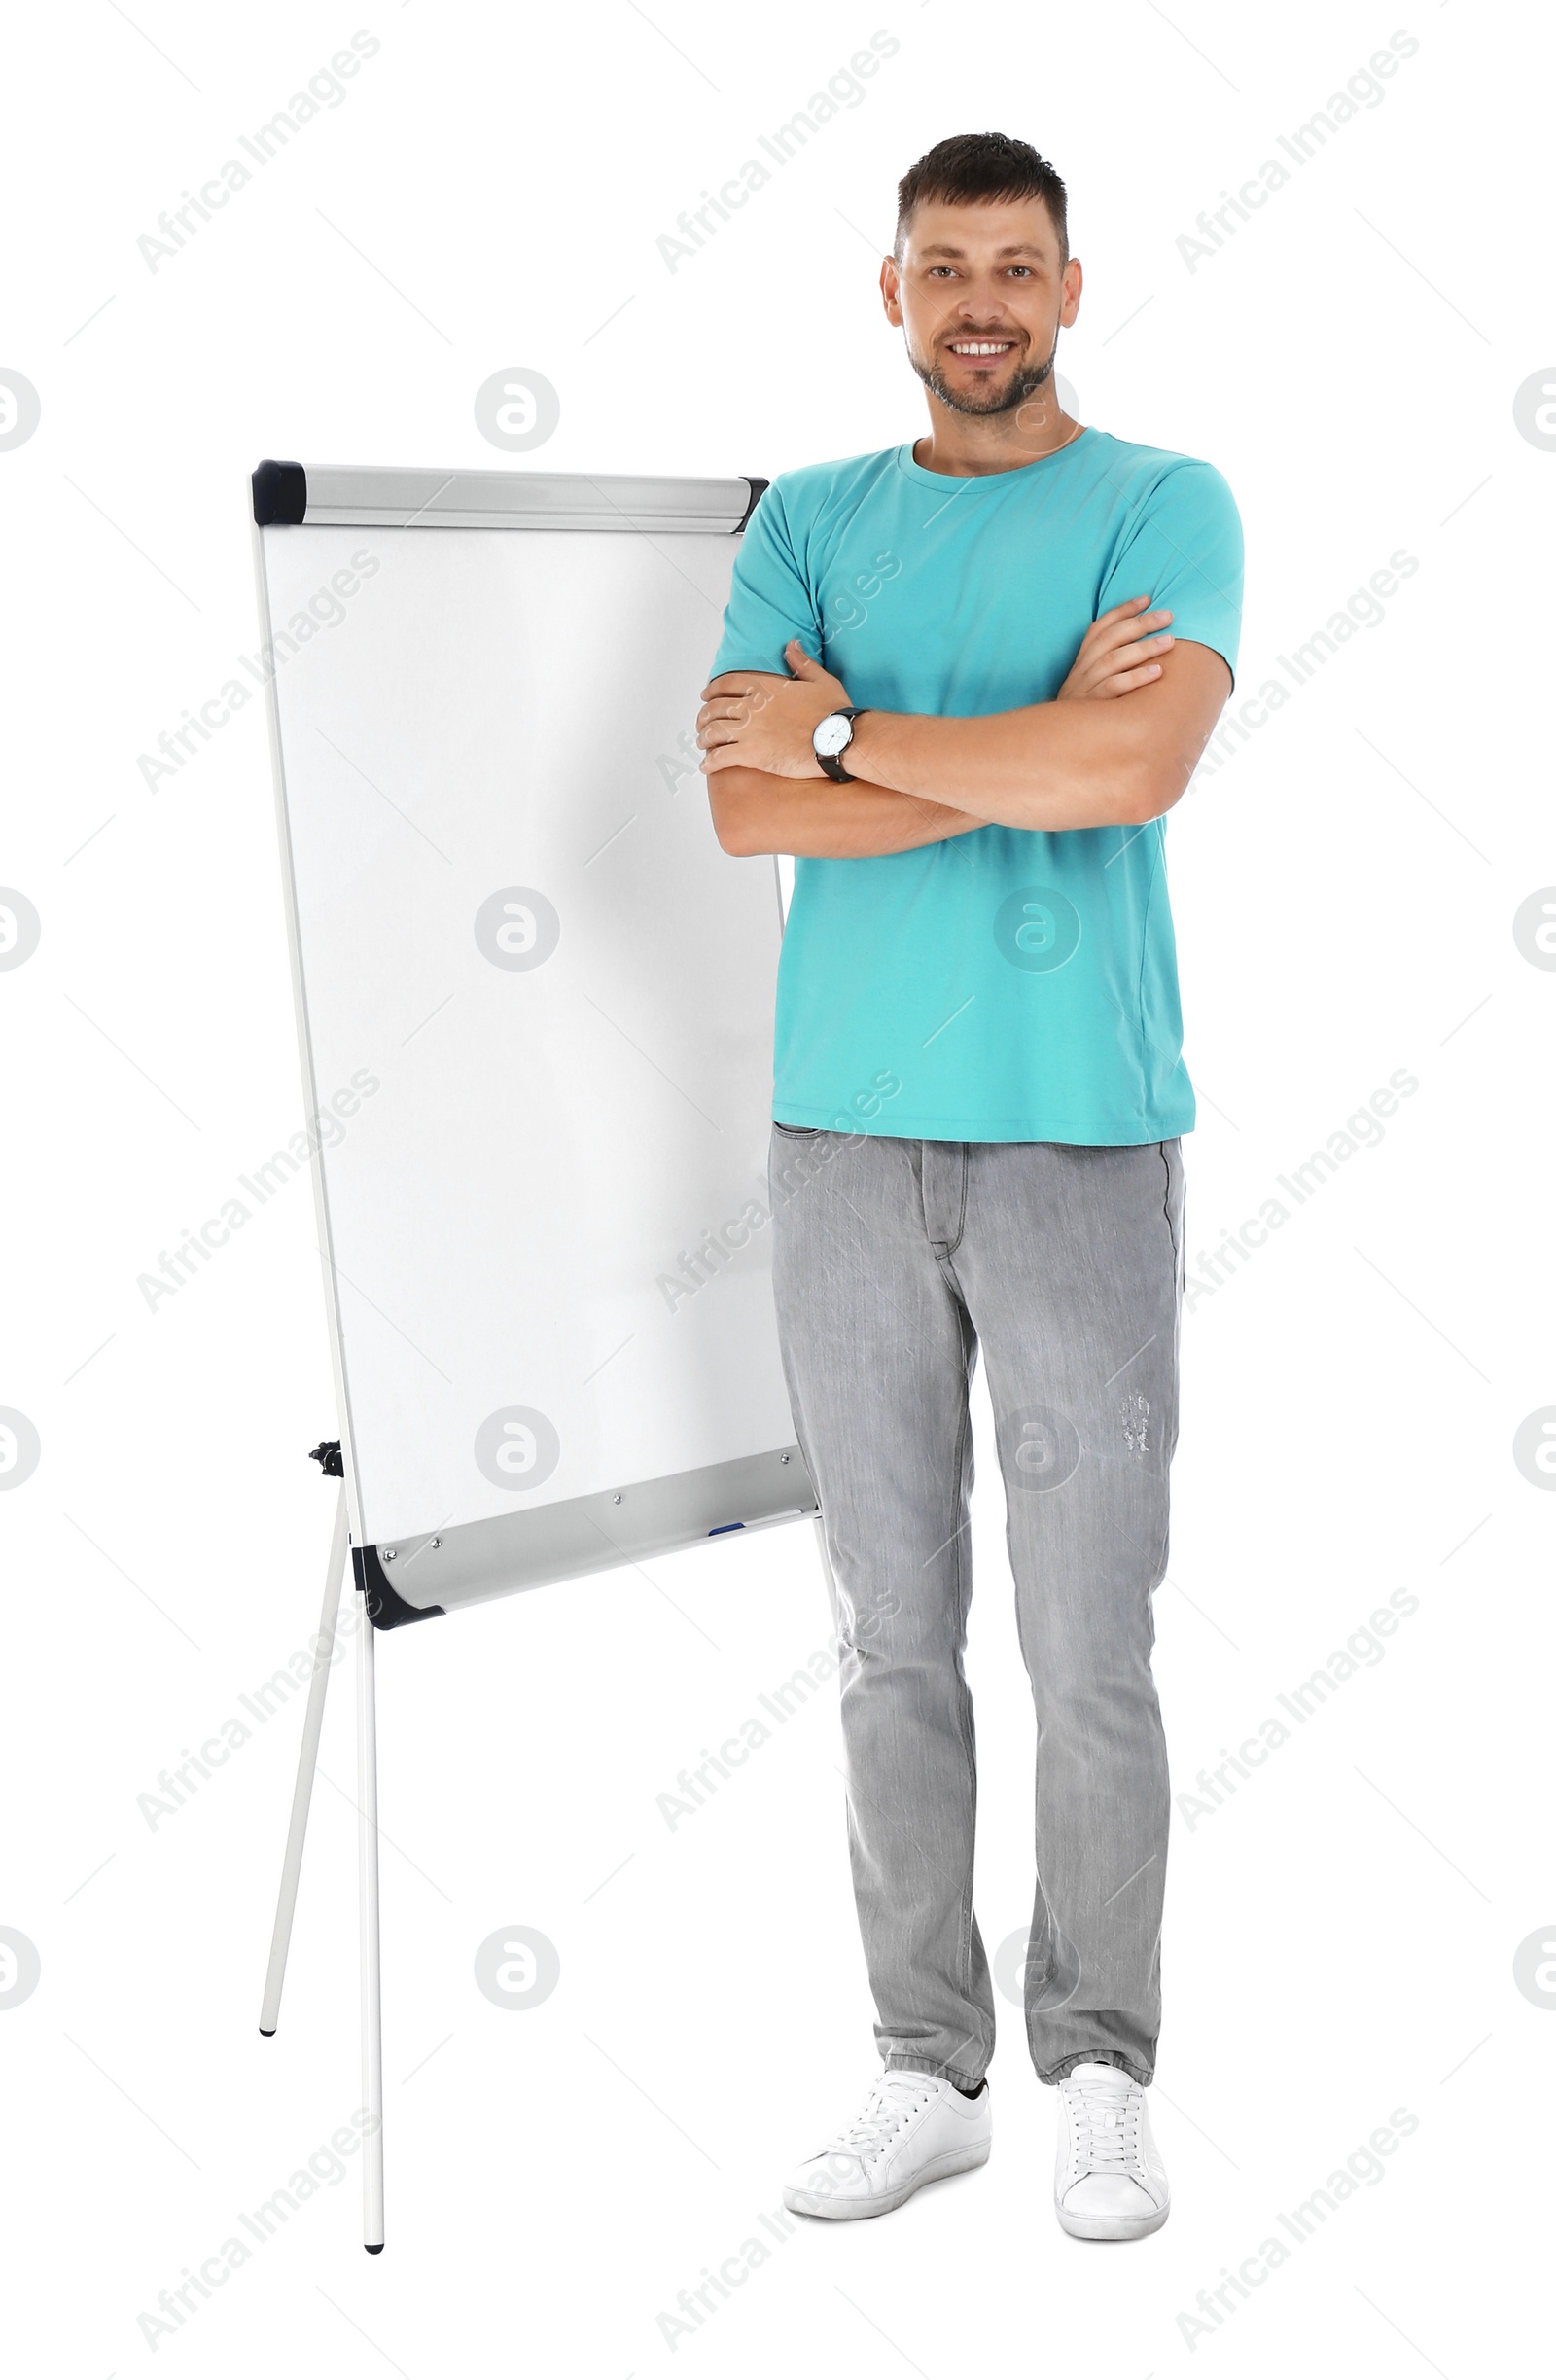 Photo of Professional business trainer near flip chart board on white background